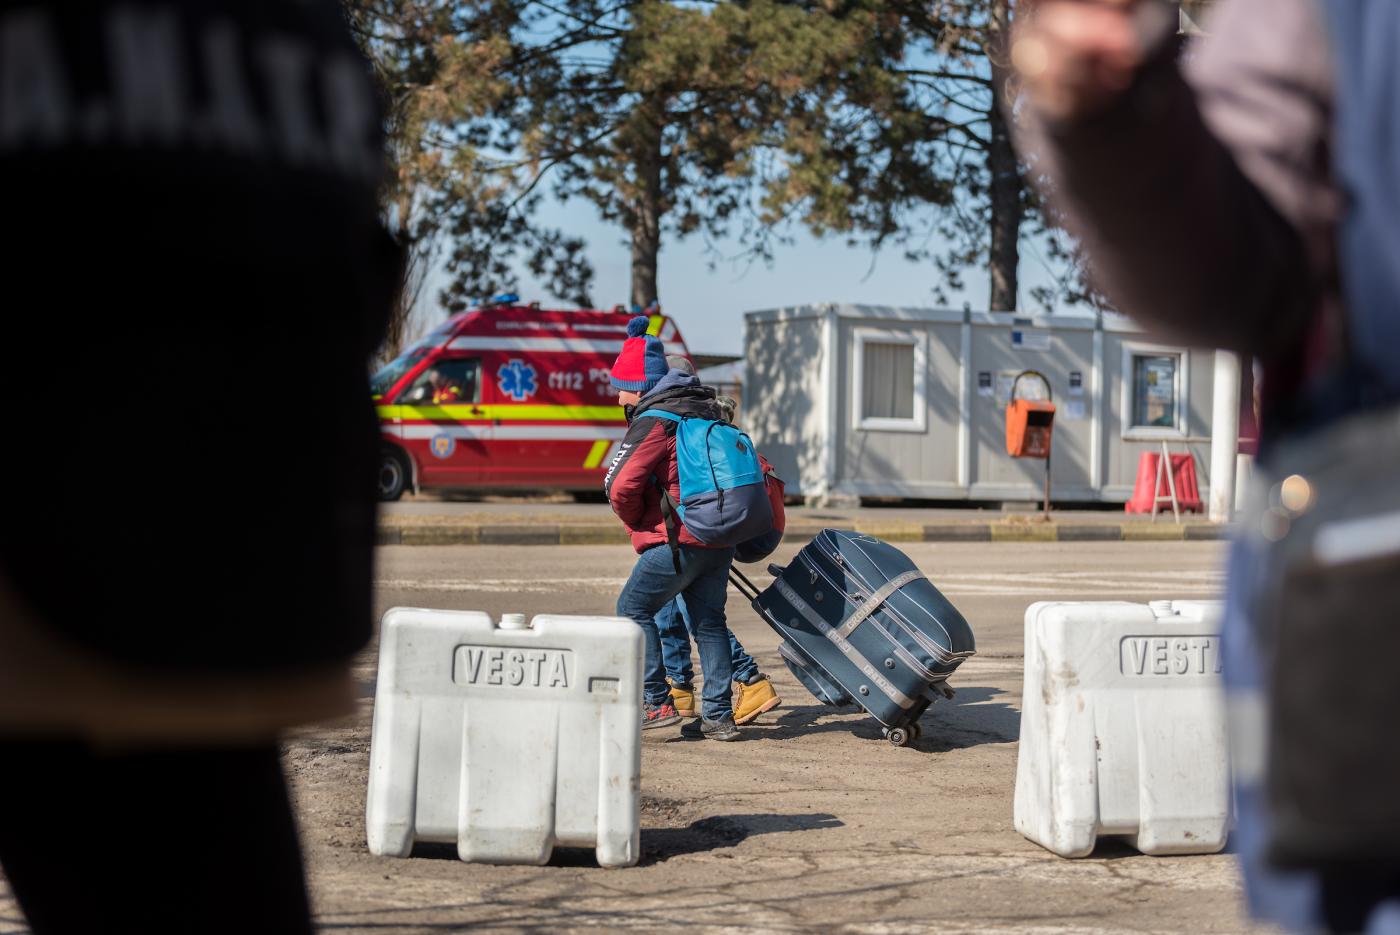 Two boys pull their suitcases as they arrive at the Vama Siret border crossing, which connects northeast Romania with Ukraine. Following the invasion of Ukraine by Russian military starting on 24 February 2022, thousands of refugees have fled across the Ukrainian border into Romania, Photo: Albin Hillert/WCC